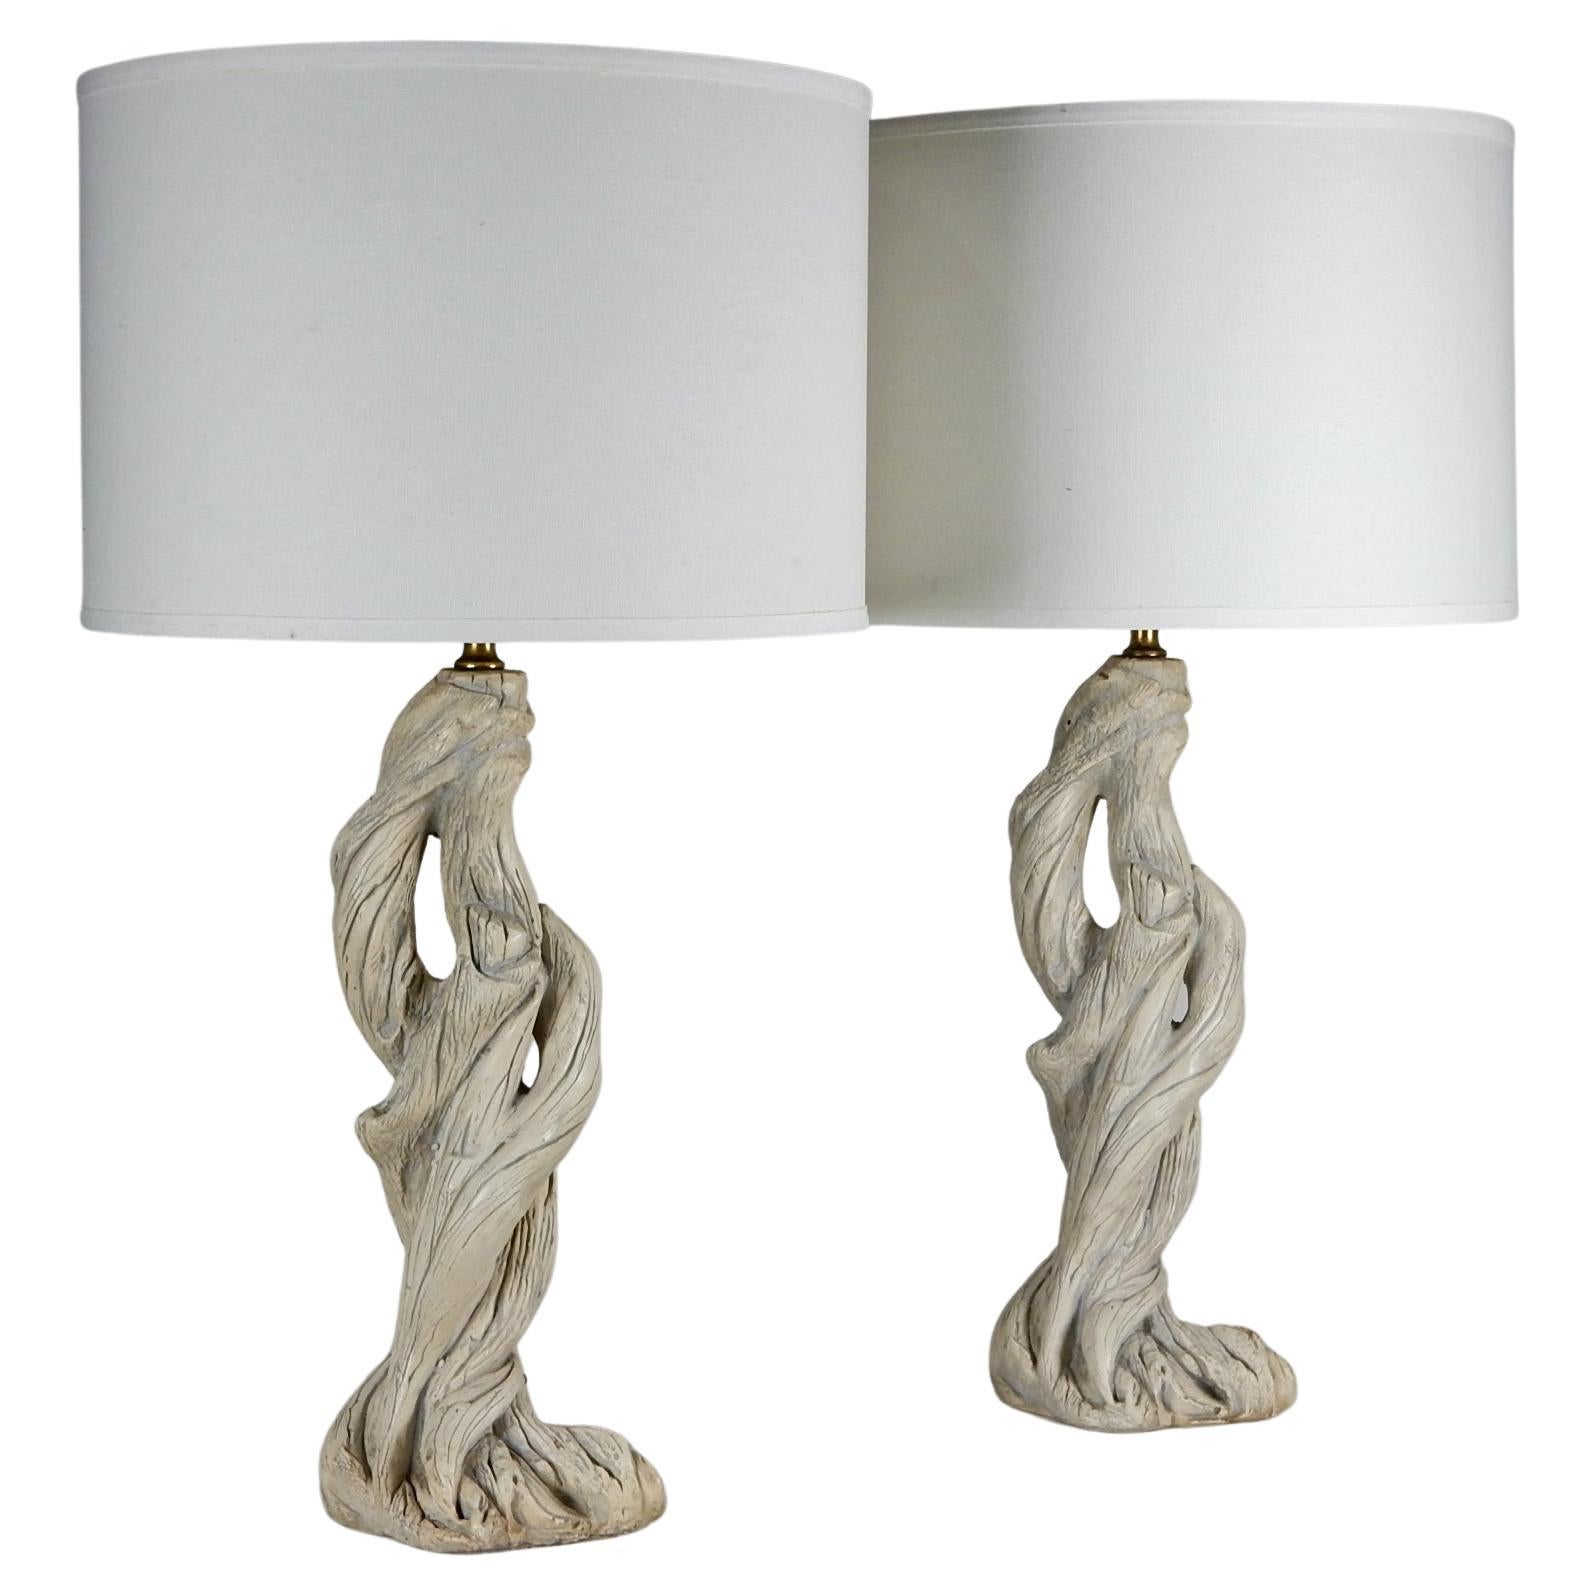 Fabulous pair of Faux Bois table lamps in the design style of Serge Roche.
They are a true real likeness to natural driftwood.
Circa 1960's. They are in original condition
including wiring. No repairs or cracks.
Shades pictured not included.